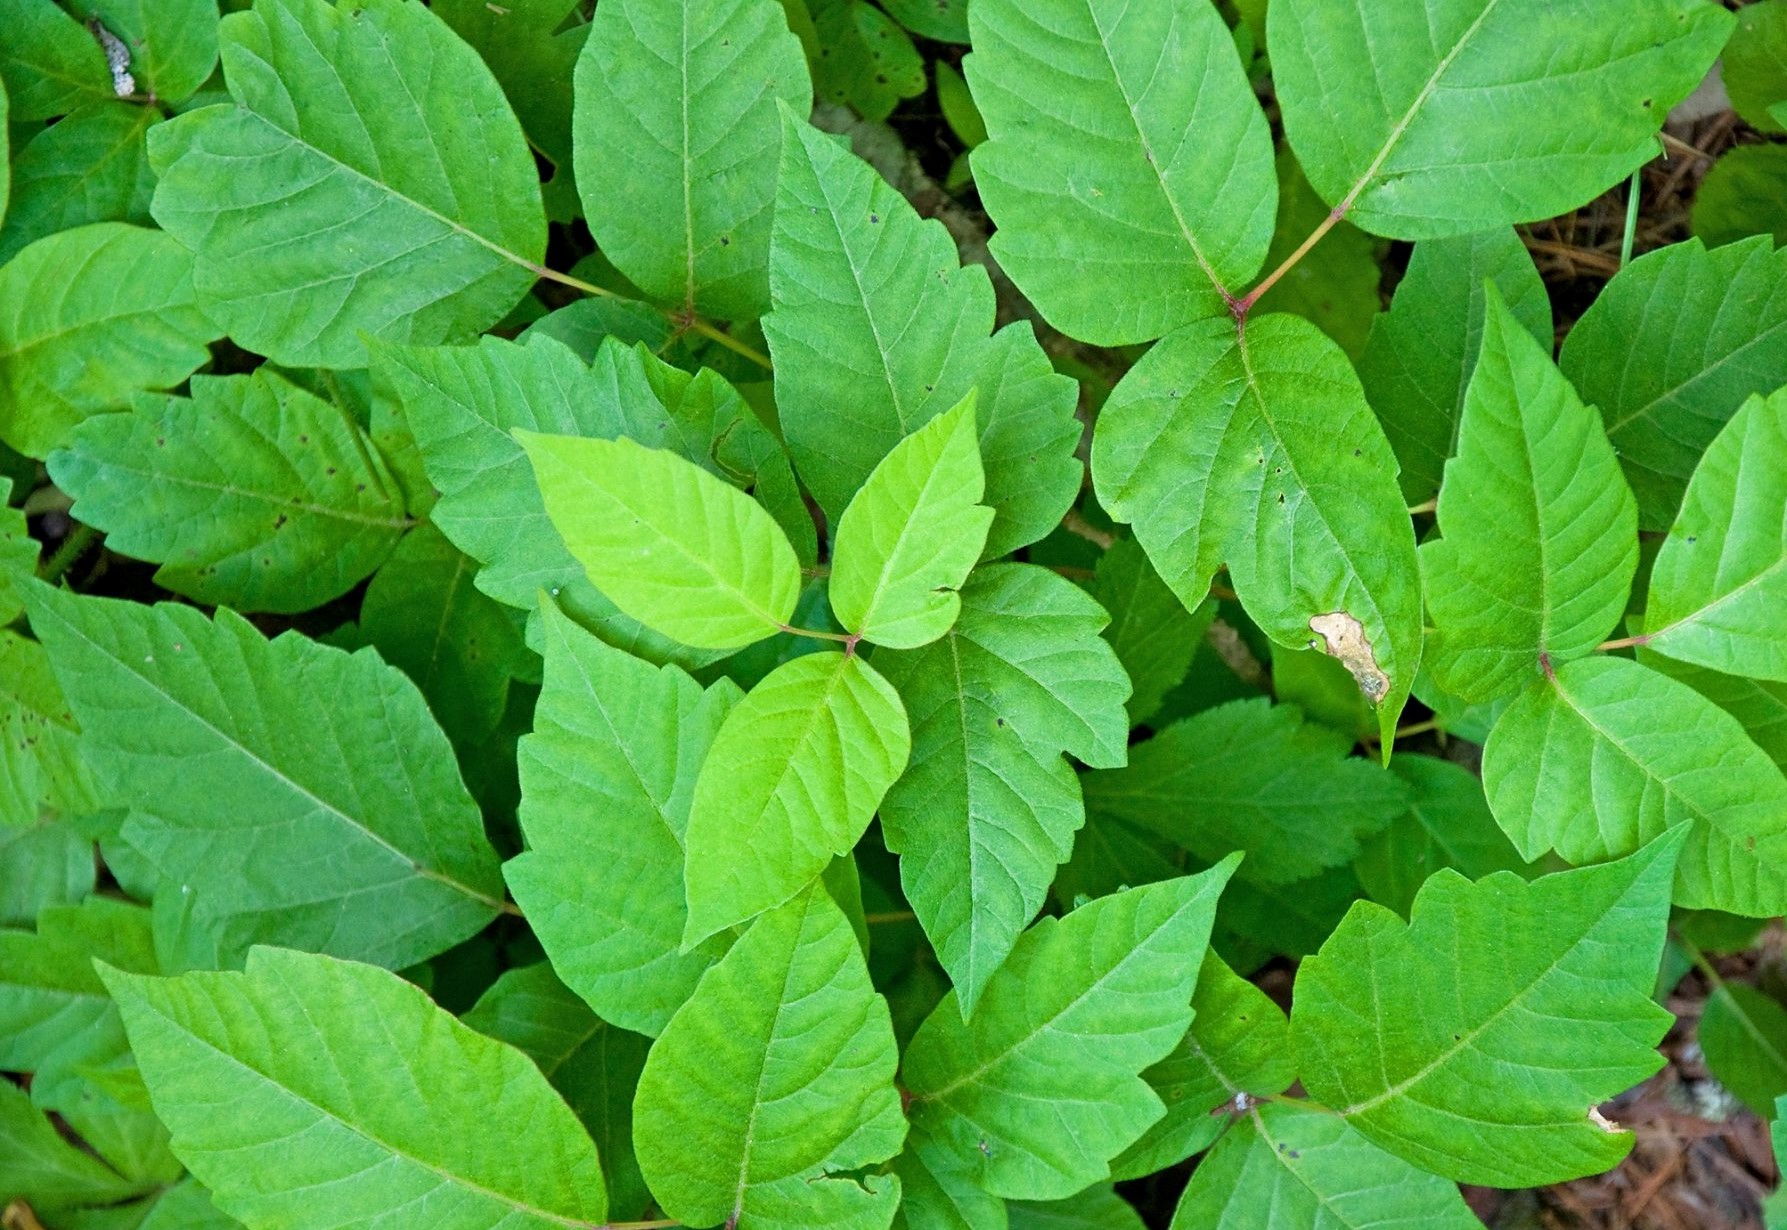 poison ivy plant images